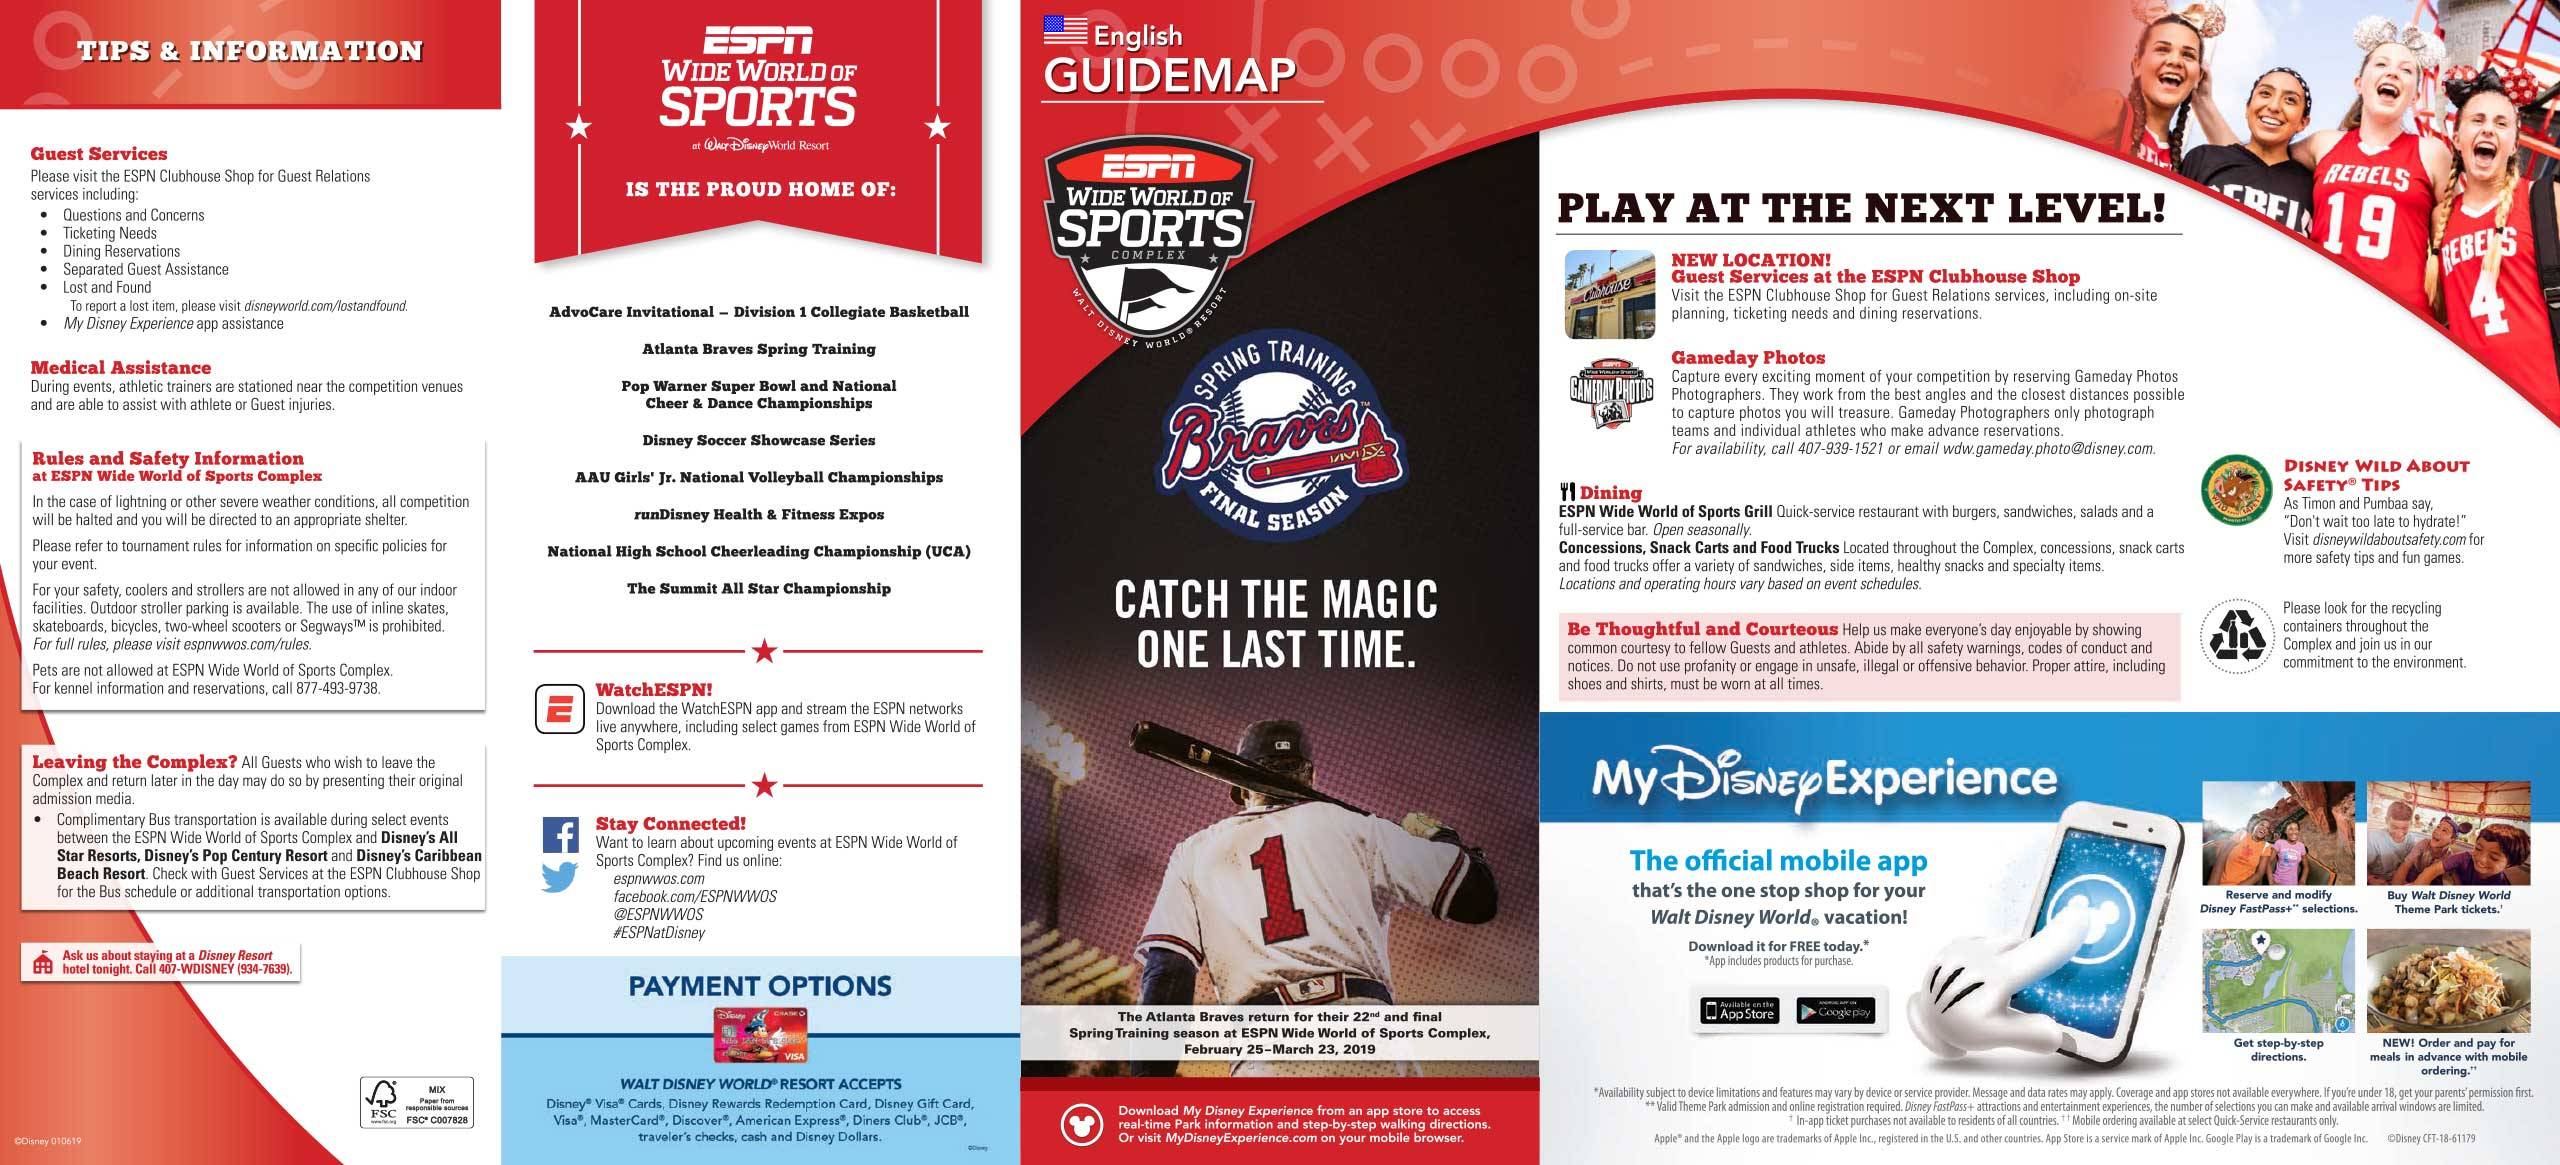 ESPN Wide World of Sports Guide Map January 2019 - Front